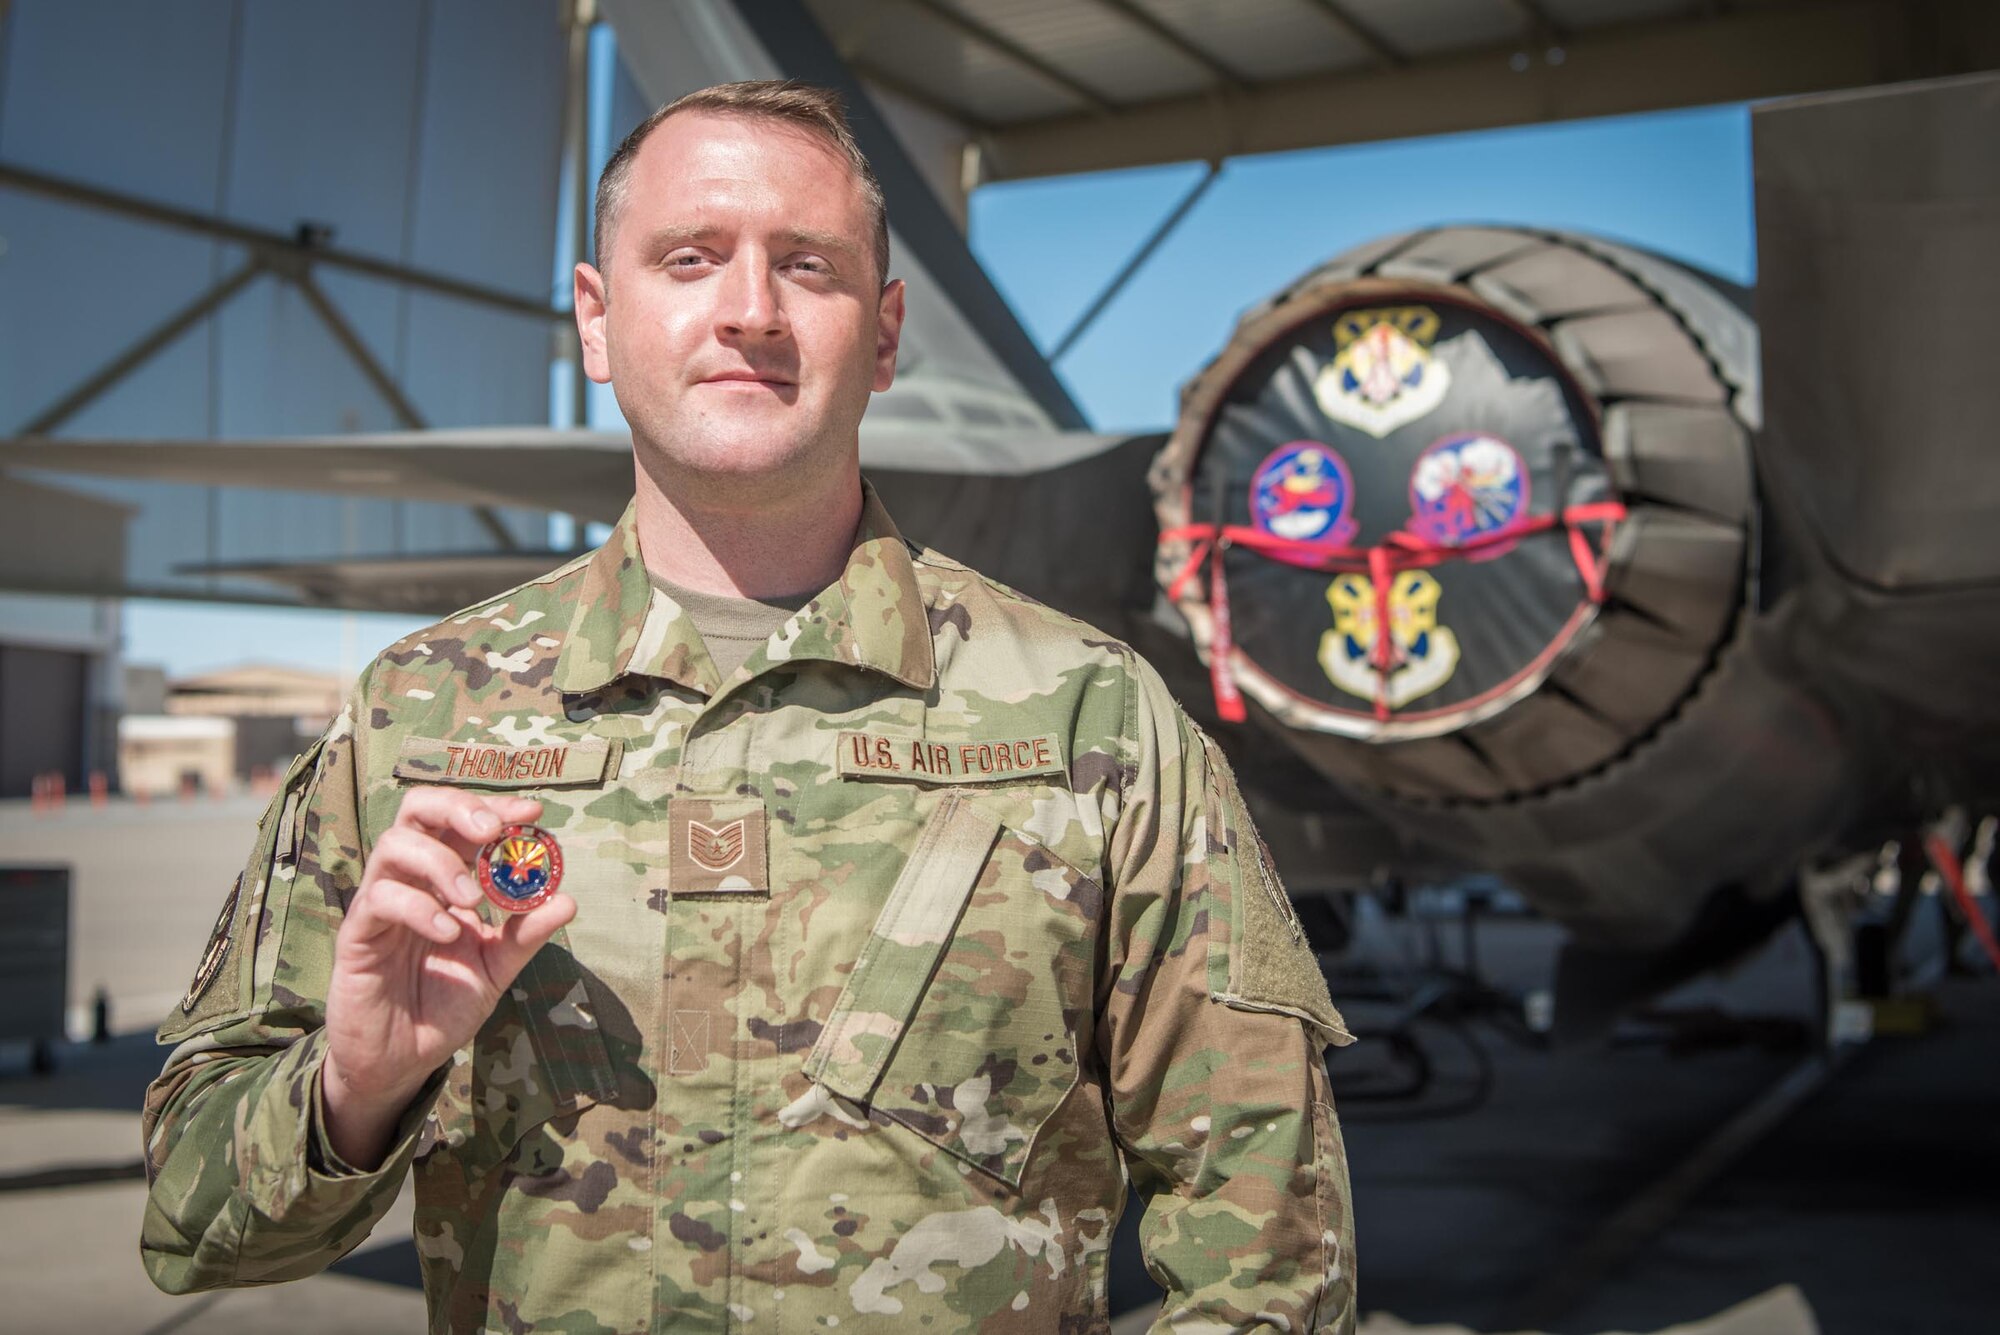 Tech. Sgt. Chad Thomson, advanced fighter aircraft integrated avionics craftsman with the 944th Aircraft Maintenance Squadron, poses for a photo, May 2, 2021 at Luke Air Force Base, Arizona. Thomson was named the 944th Fighter Wing Warrior of the Month for May 2021.